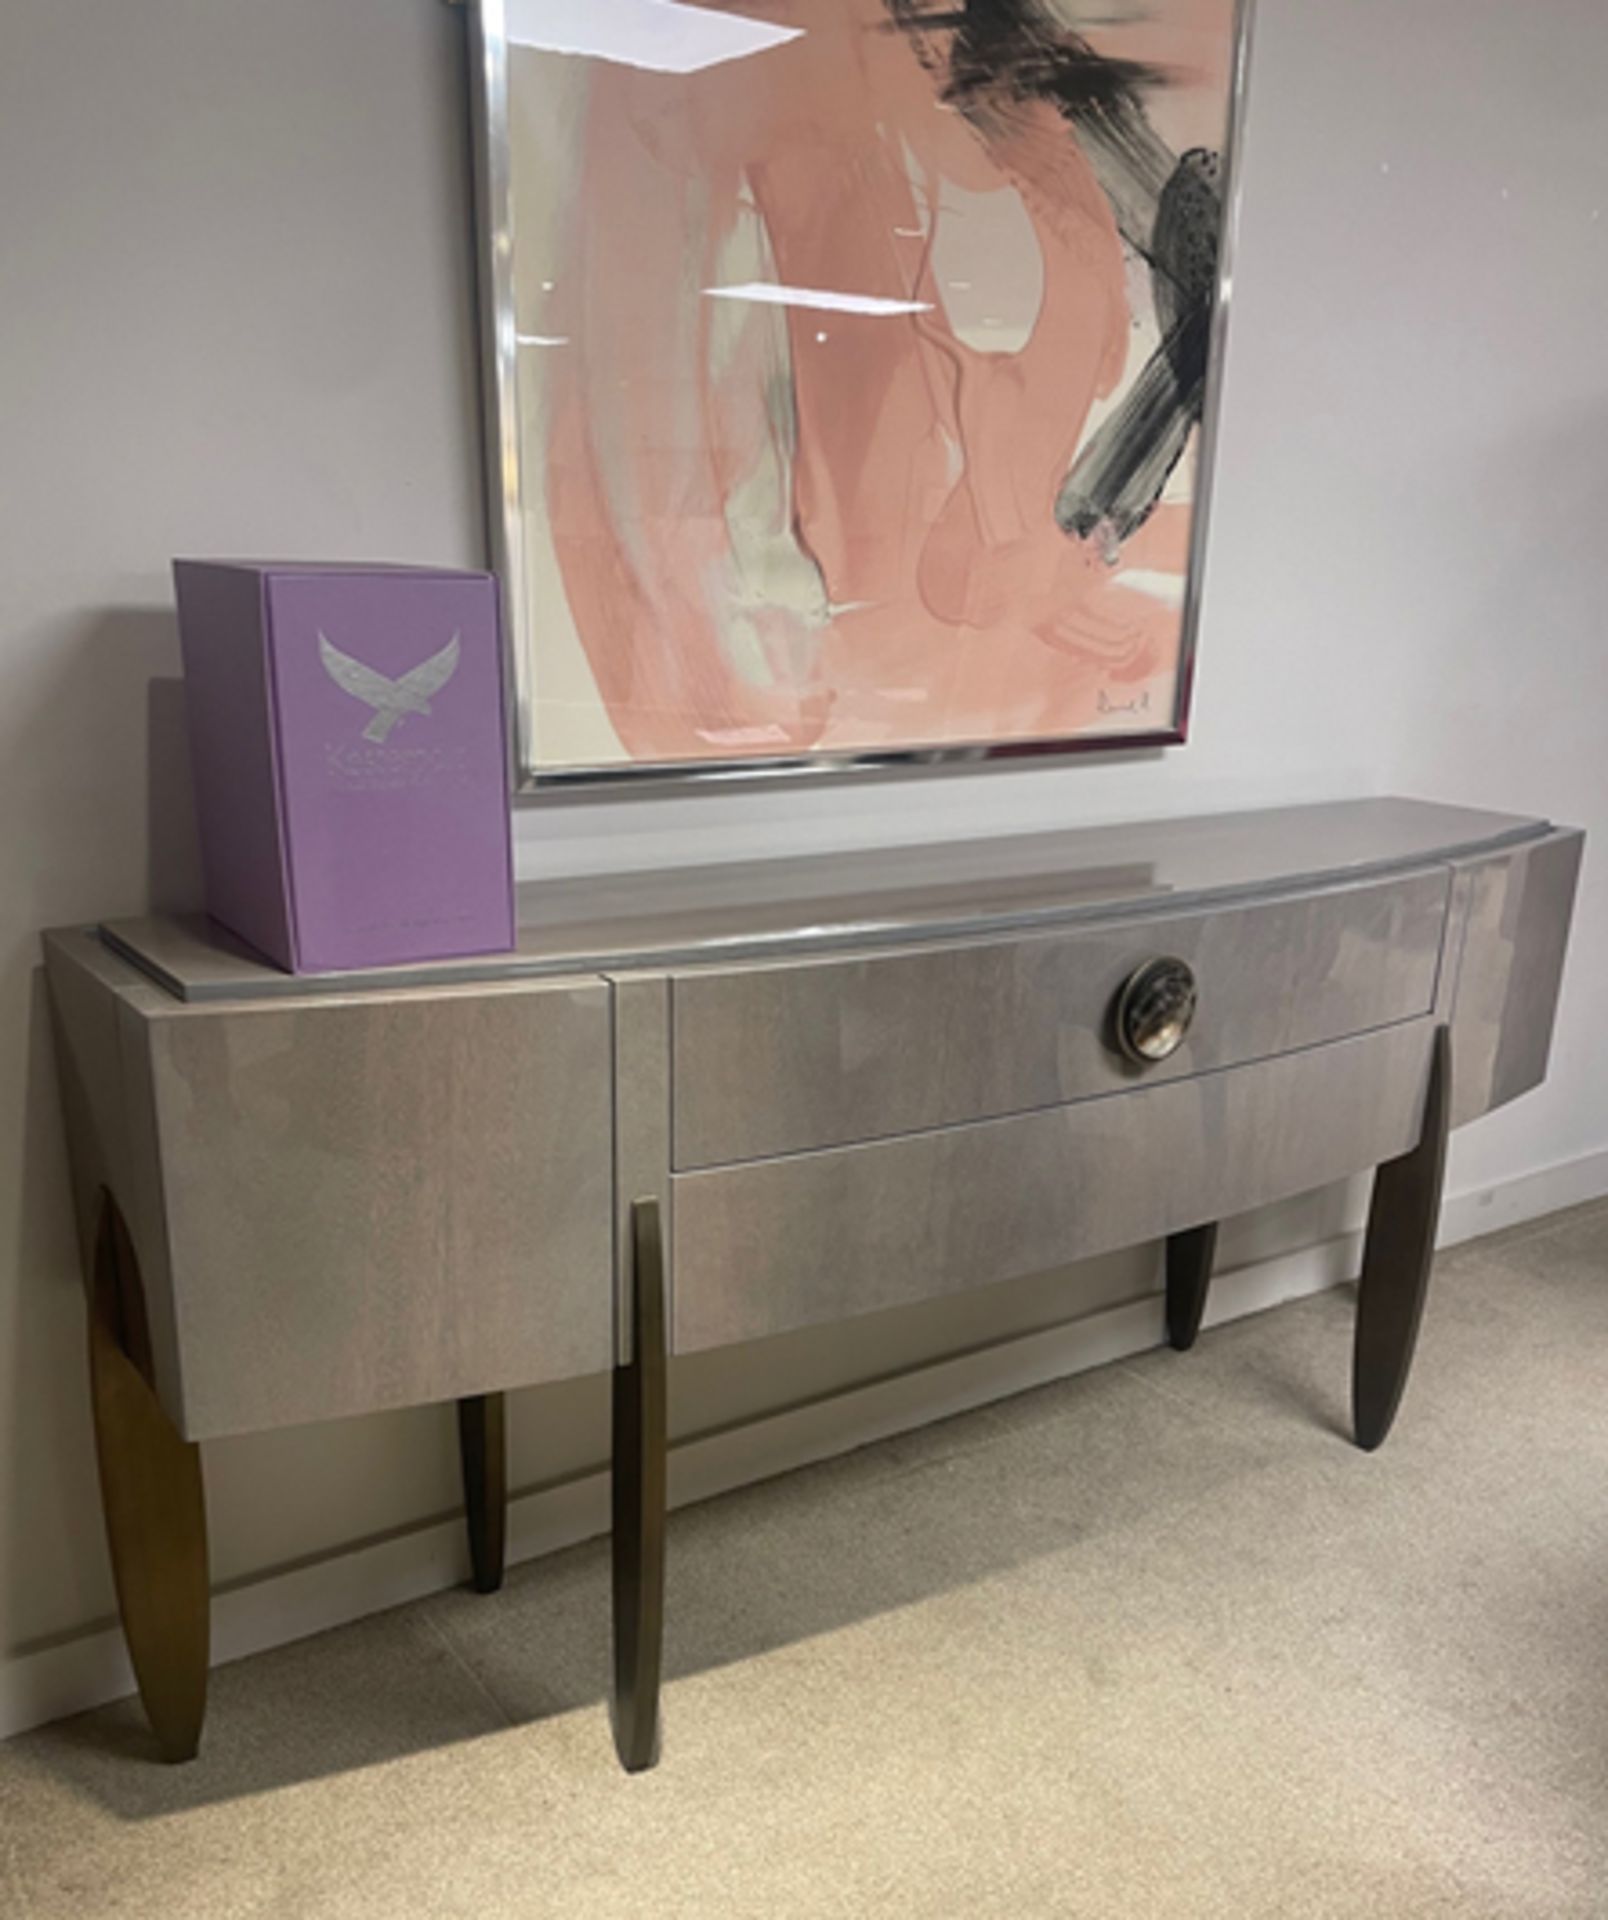 Fashion Affair Console by Telemaco for Malerba The furniture has two sides doors and two central